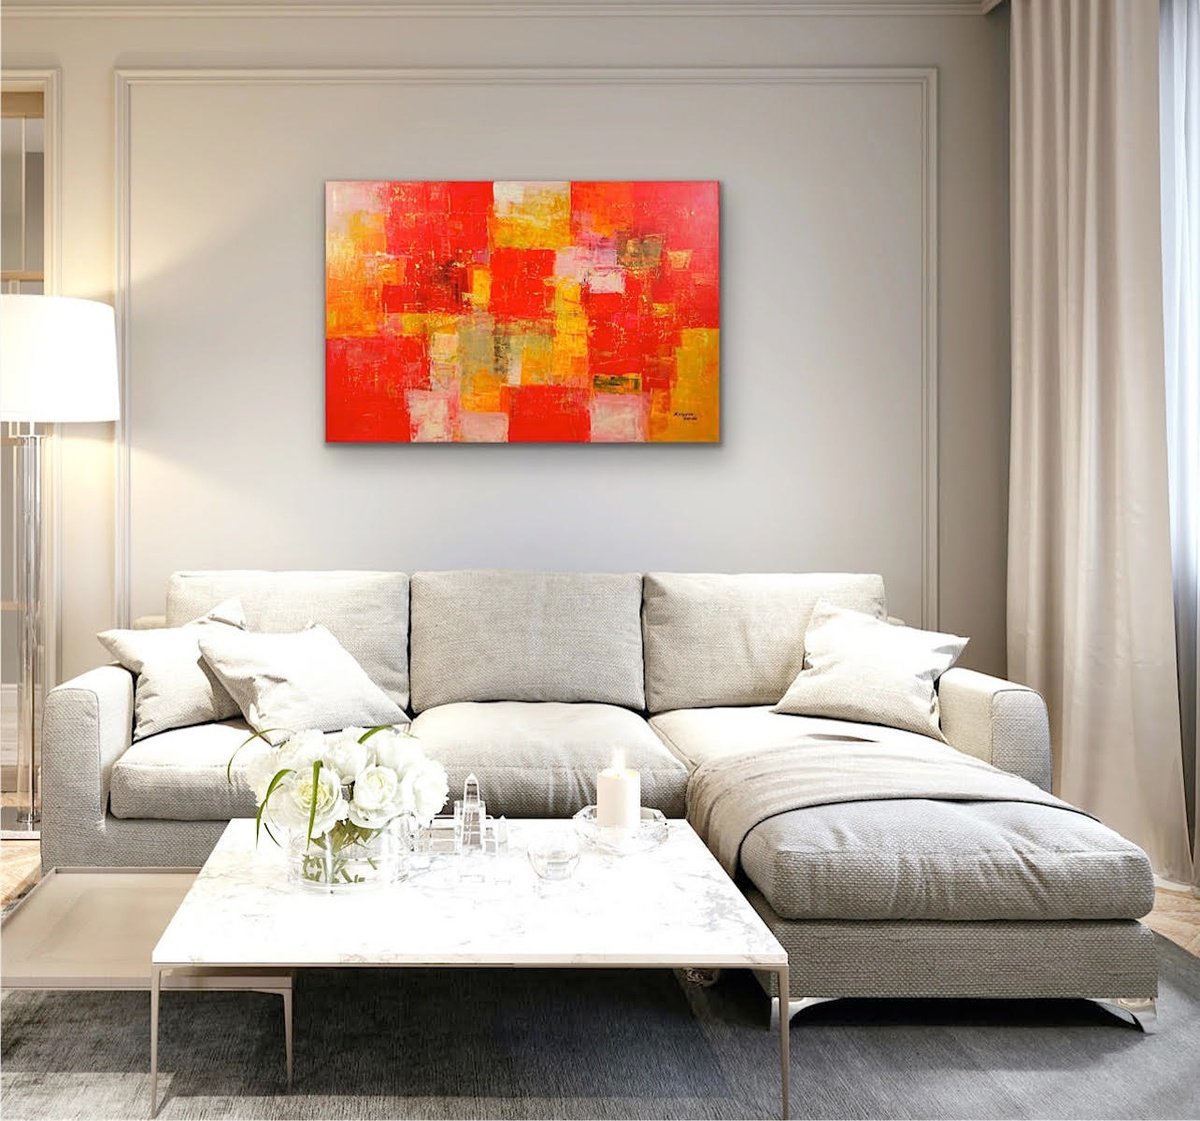 Welcoming The Summer Warmth (Large, 120x80cm) by Kalpana Soanes